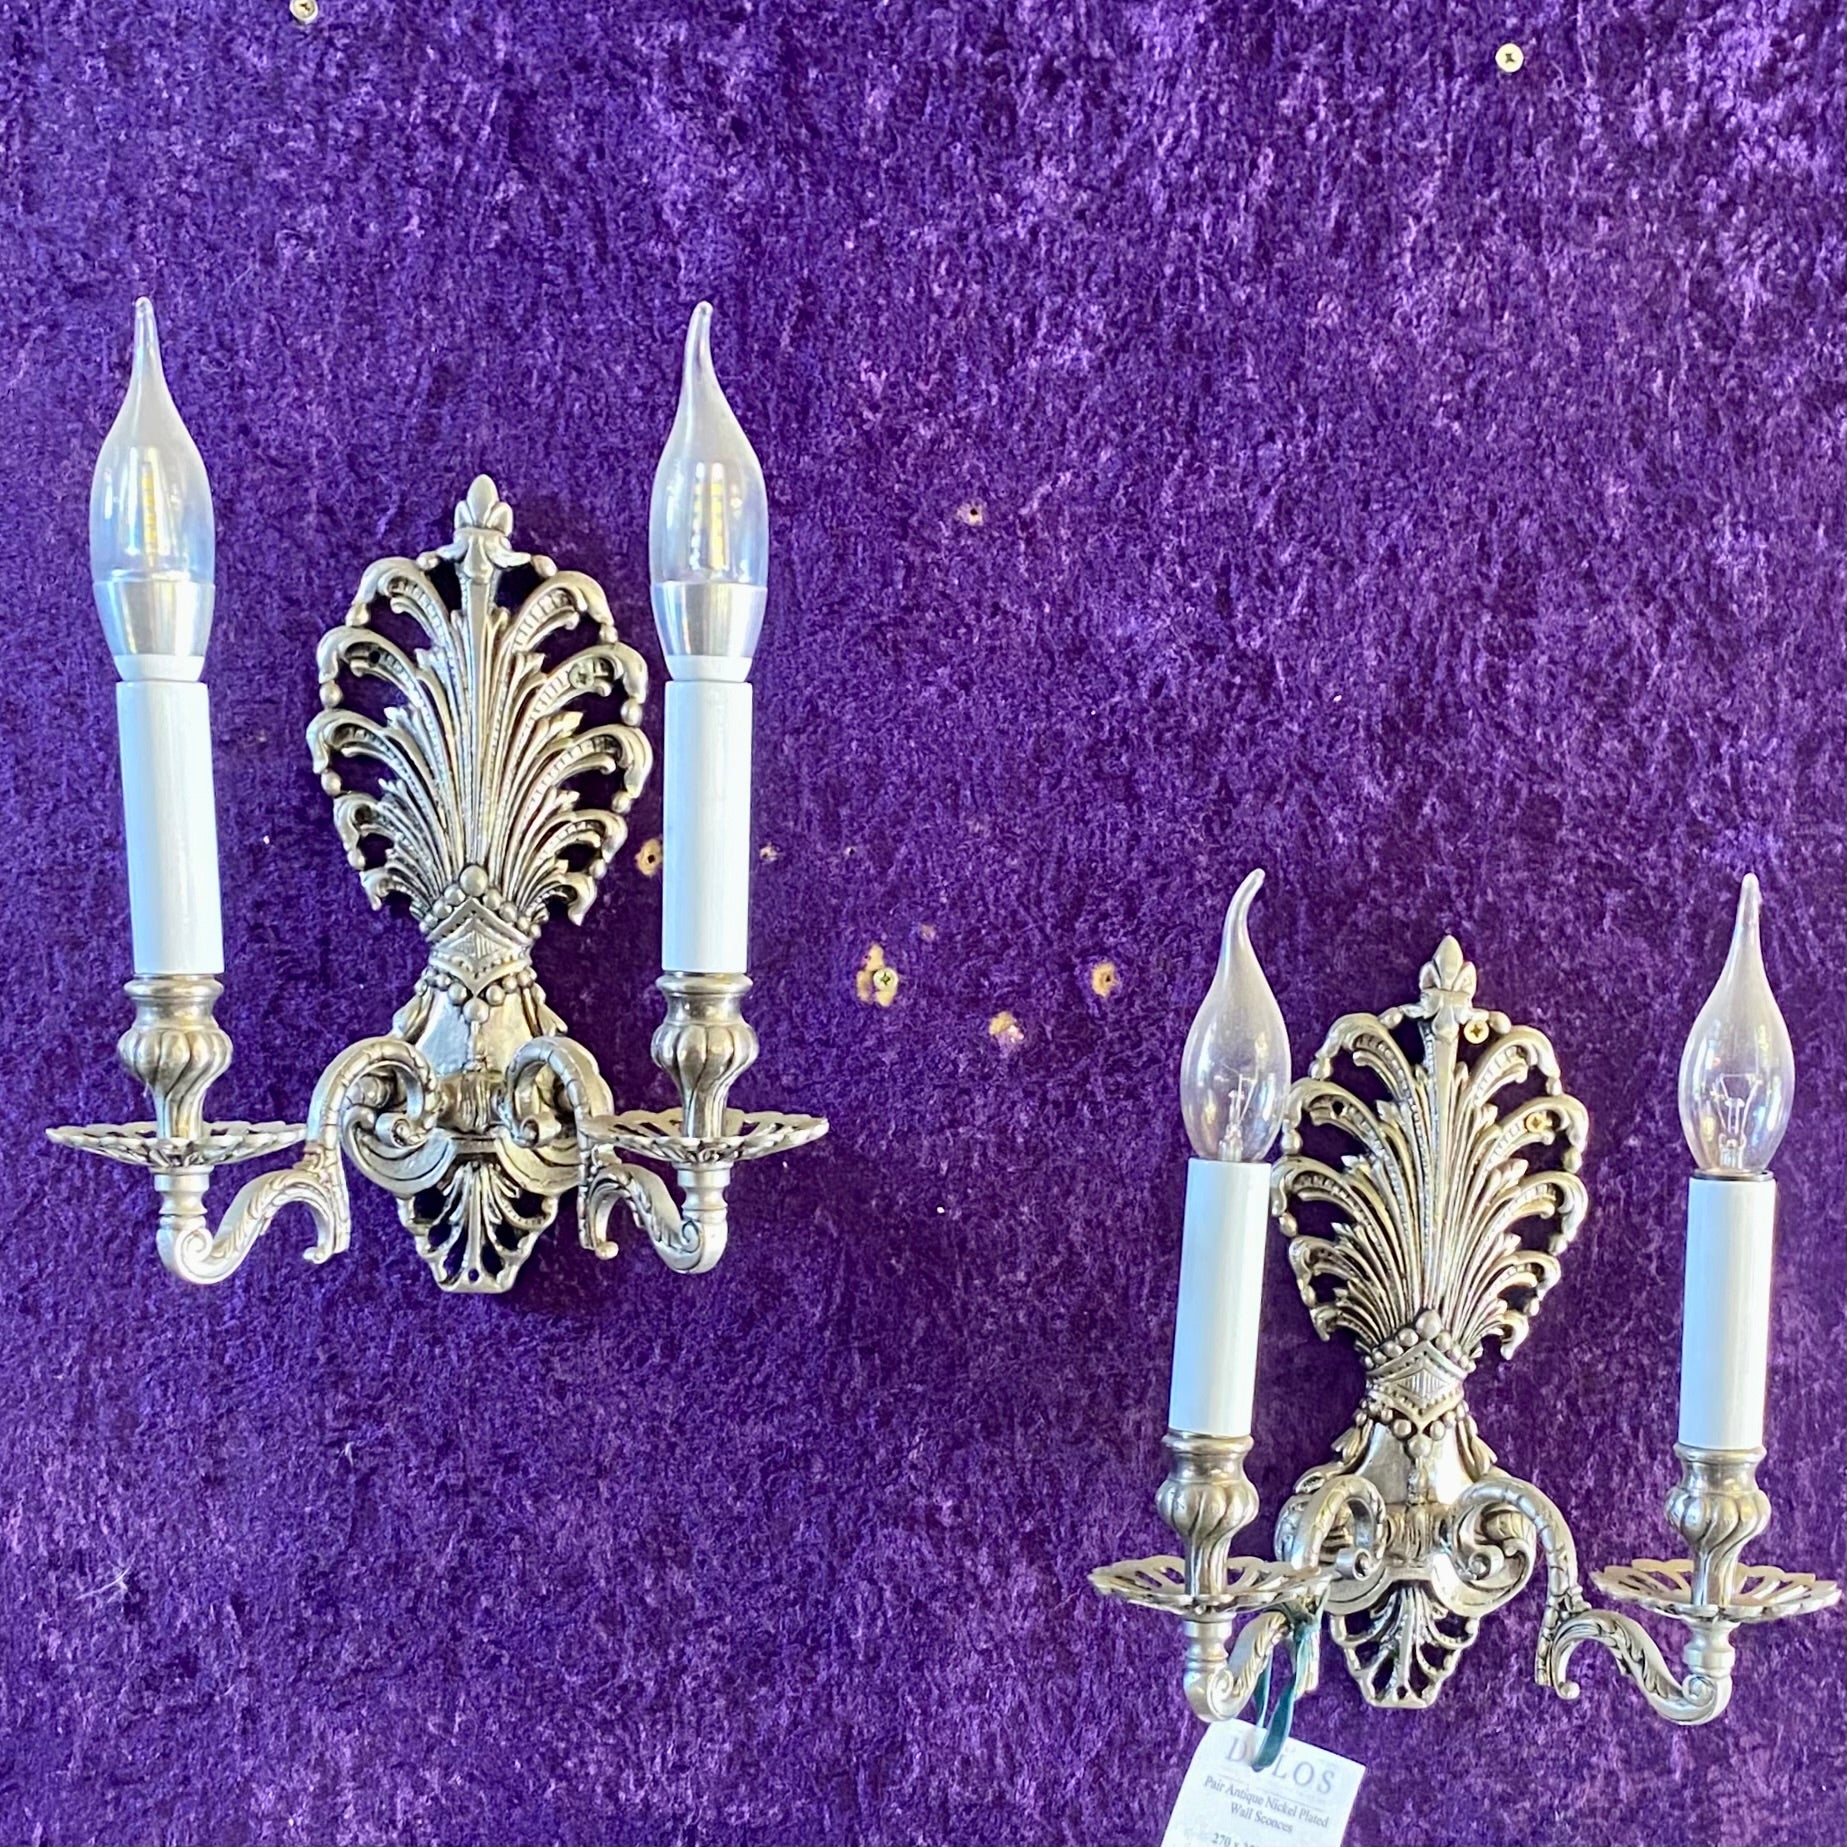 Pair Nickel Plated Antique Wall Sconces